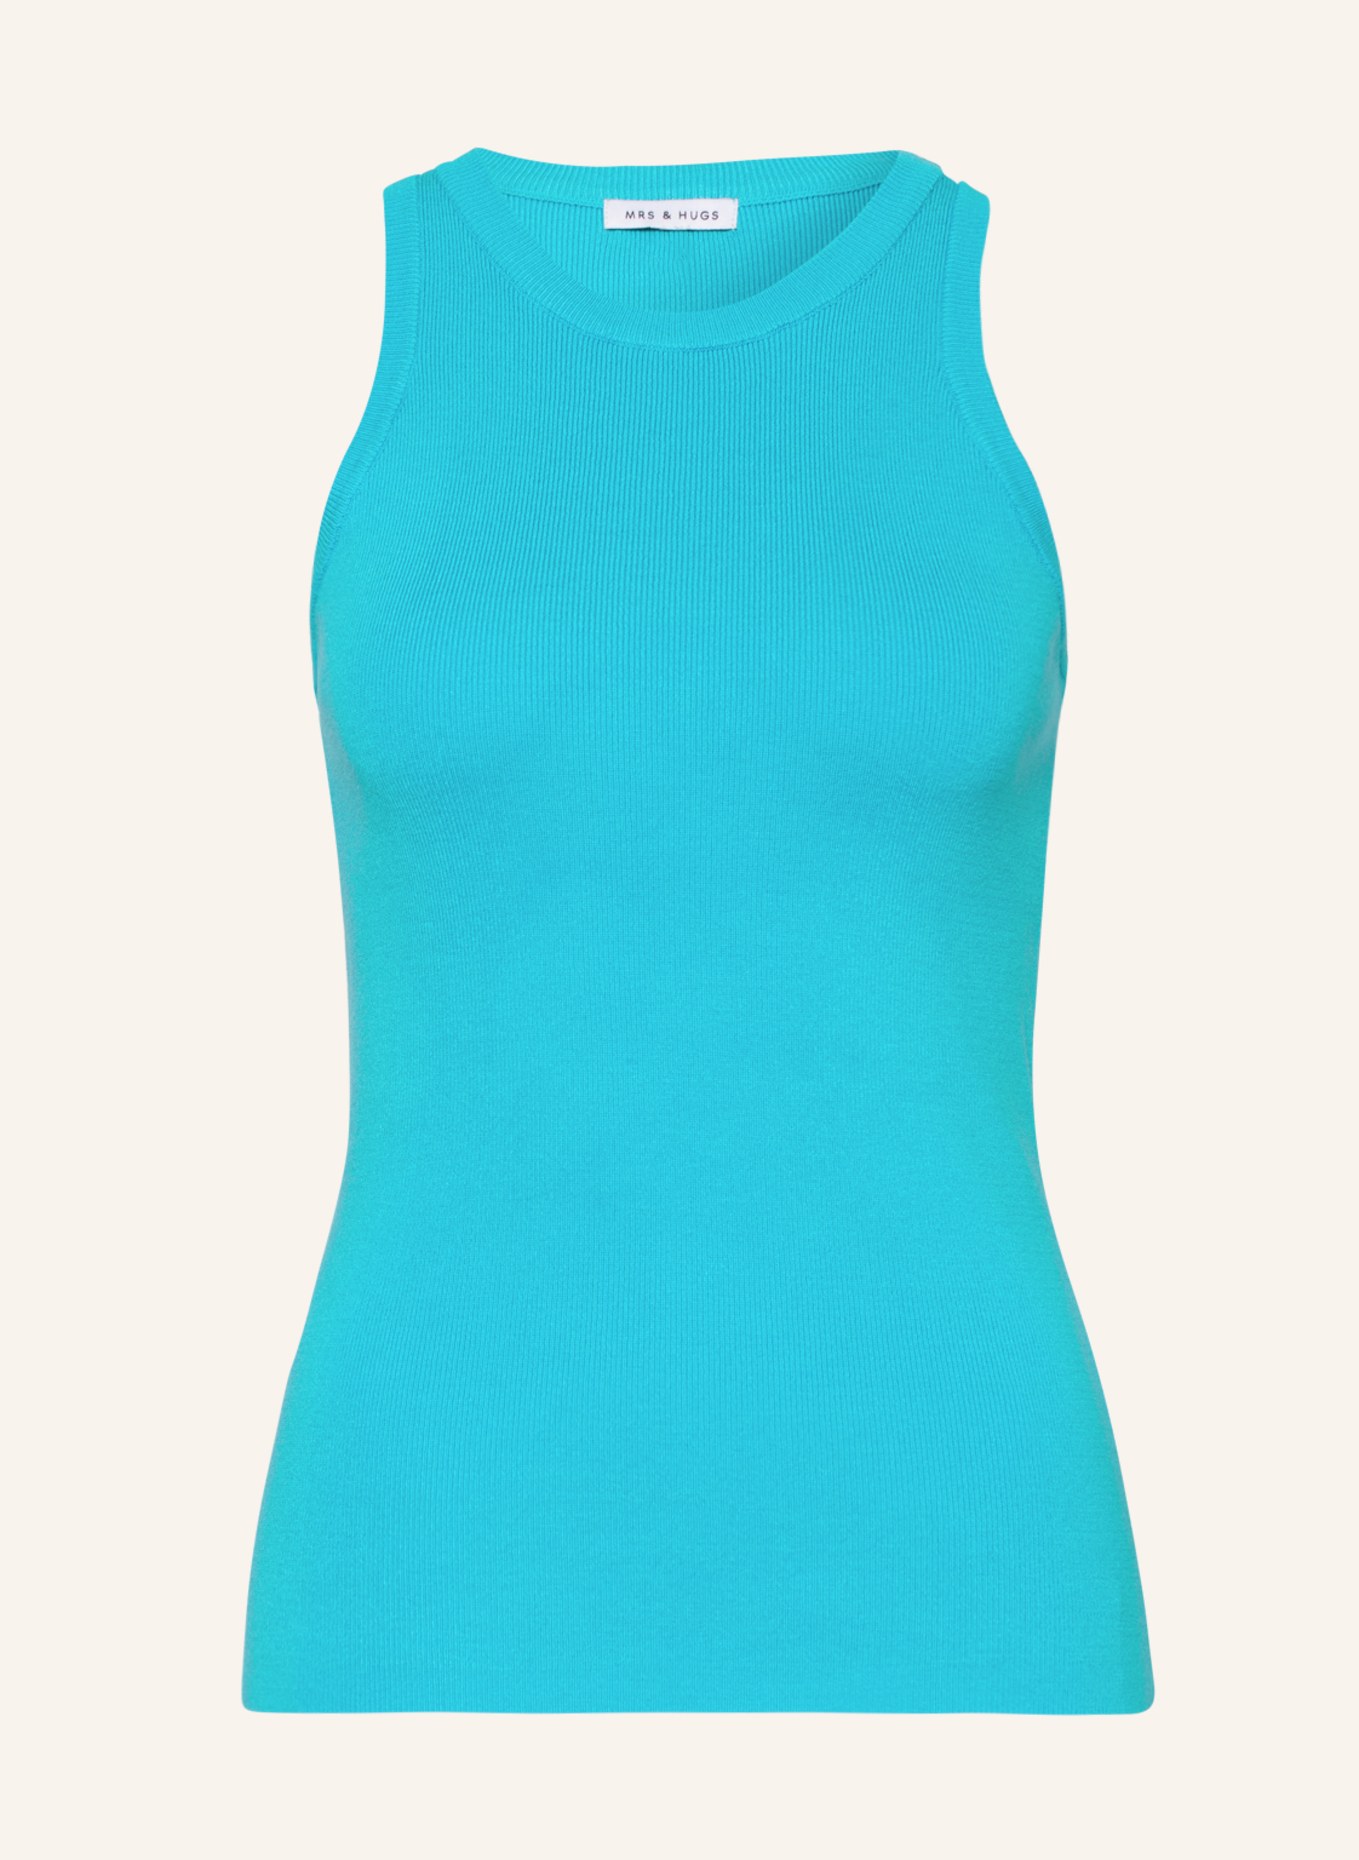 MRS & HUGS Knit top, Color: TURQUOISE (Image 1)